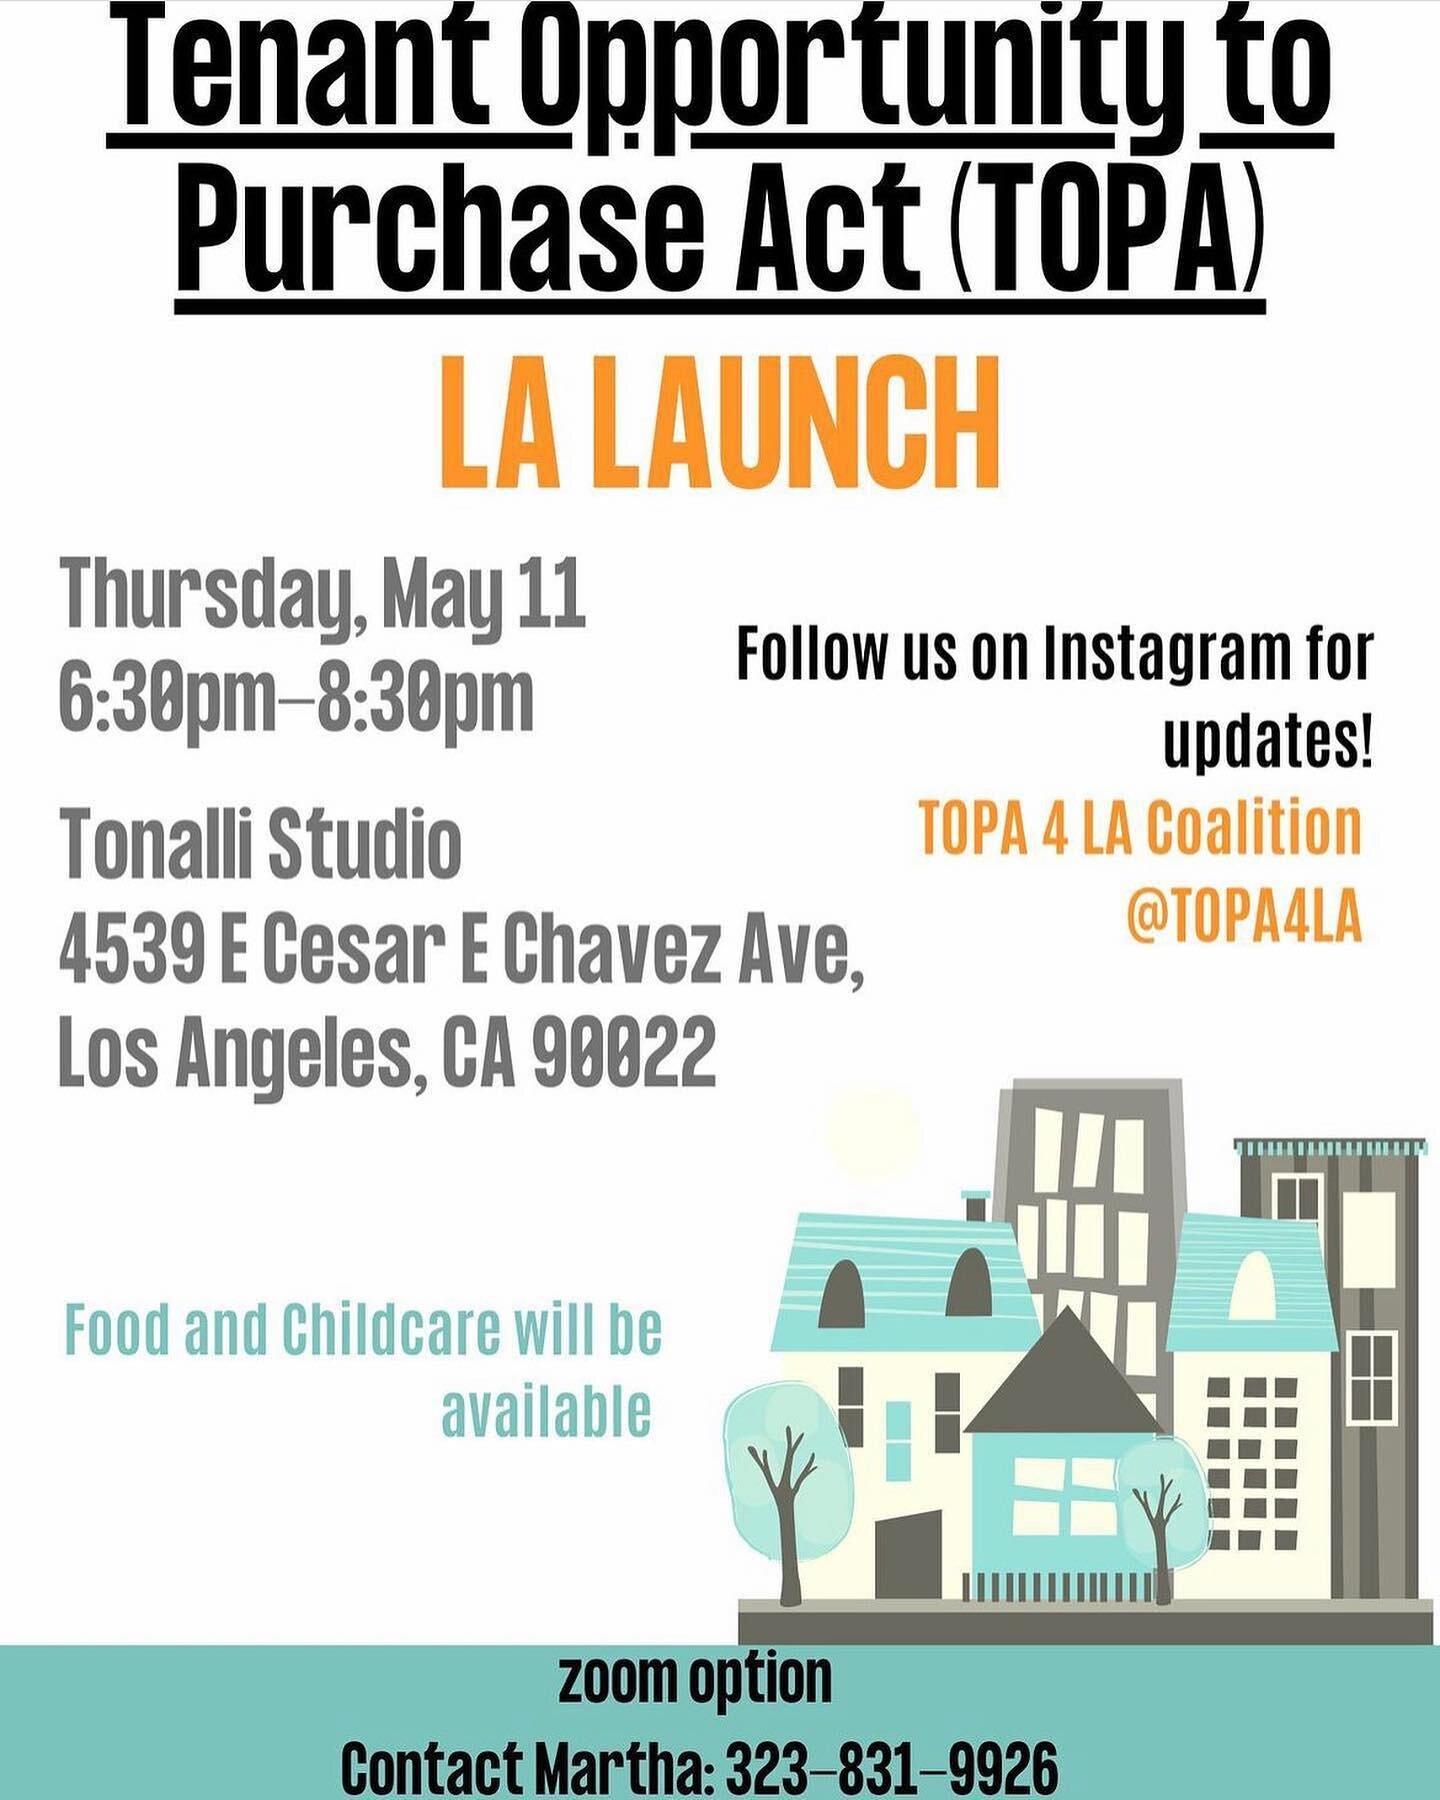 If you live in an apartment with other tenants in unincorporated LA, there is a big possibility to have the rights to purchase it with other tenants that you live with. Join us for the Te-launch of TOPA. #Repost @topa4la with @use.repost
・・・
Join us 